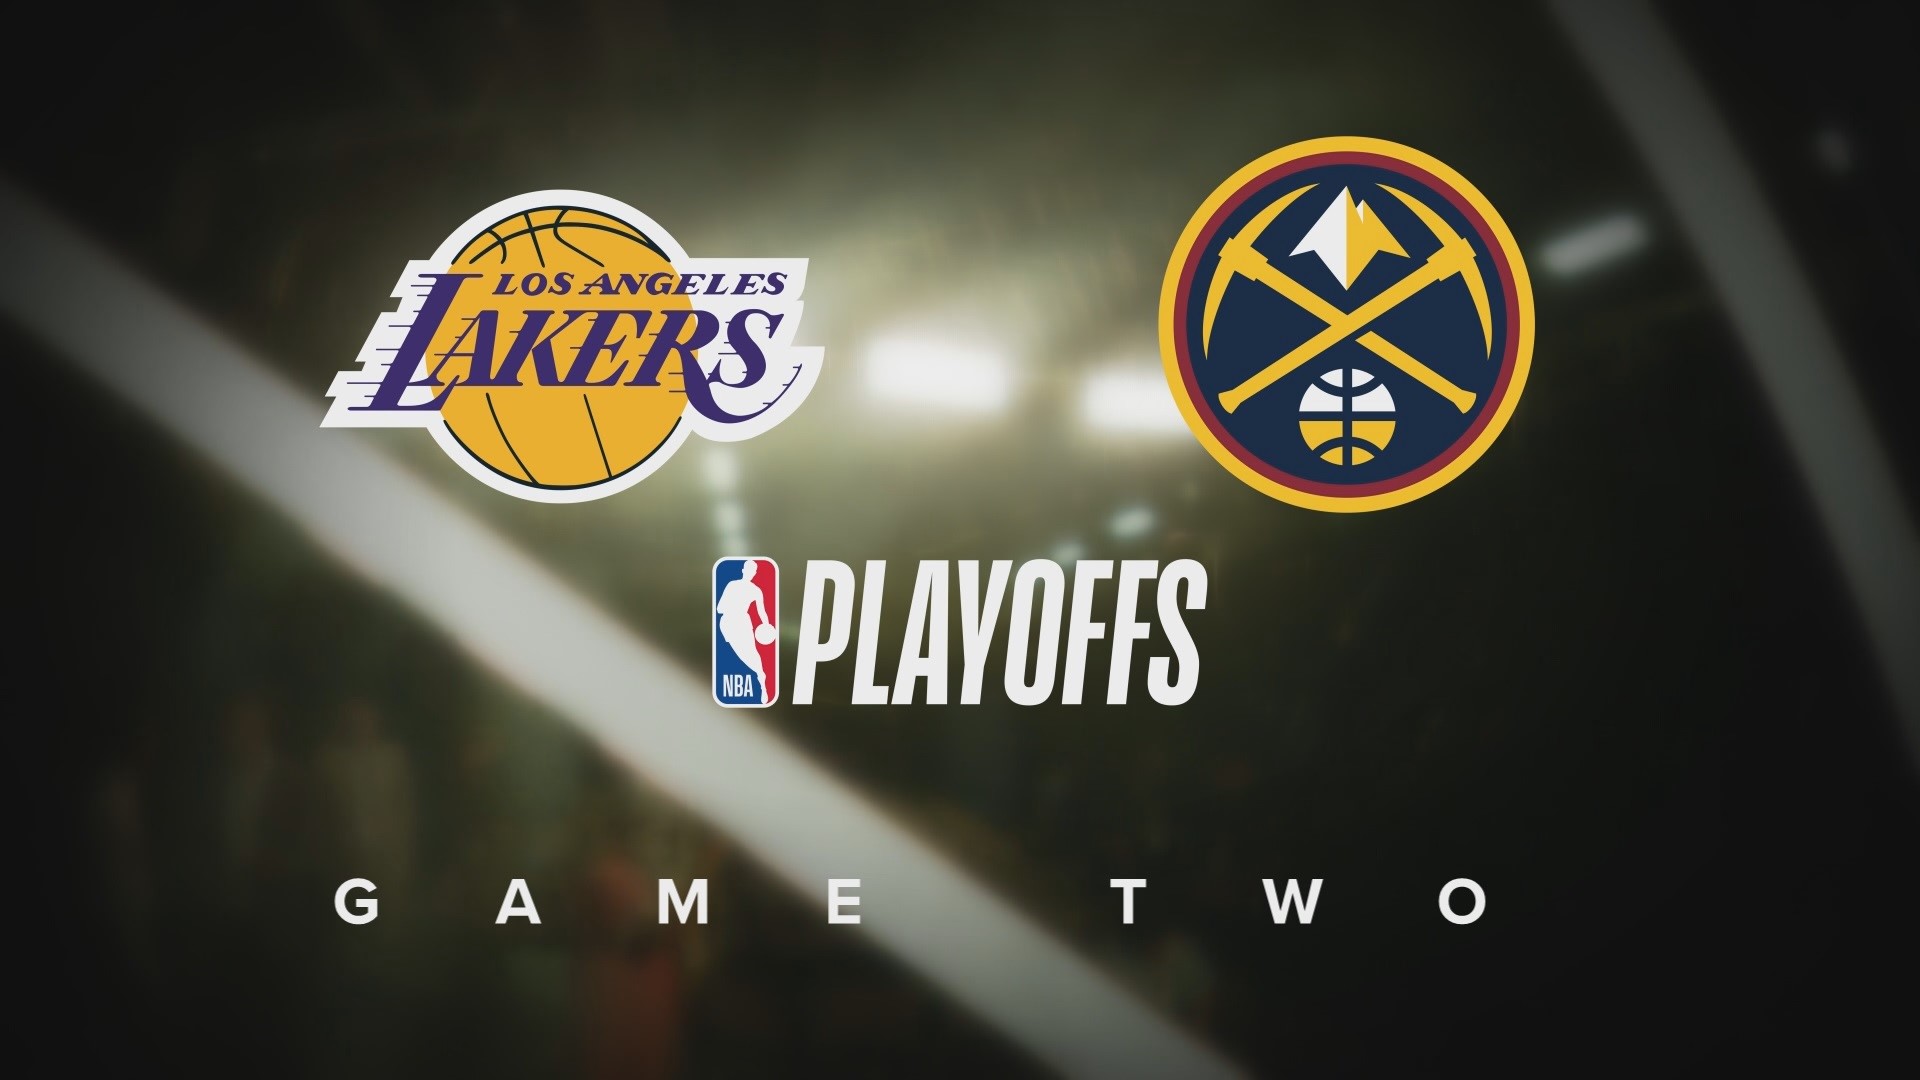 The Denver Nuggets go into the second game of their opening-round NBA playoff series with a 1-0 lead over the Los Angeles Lakers.